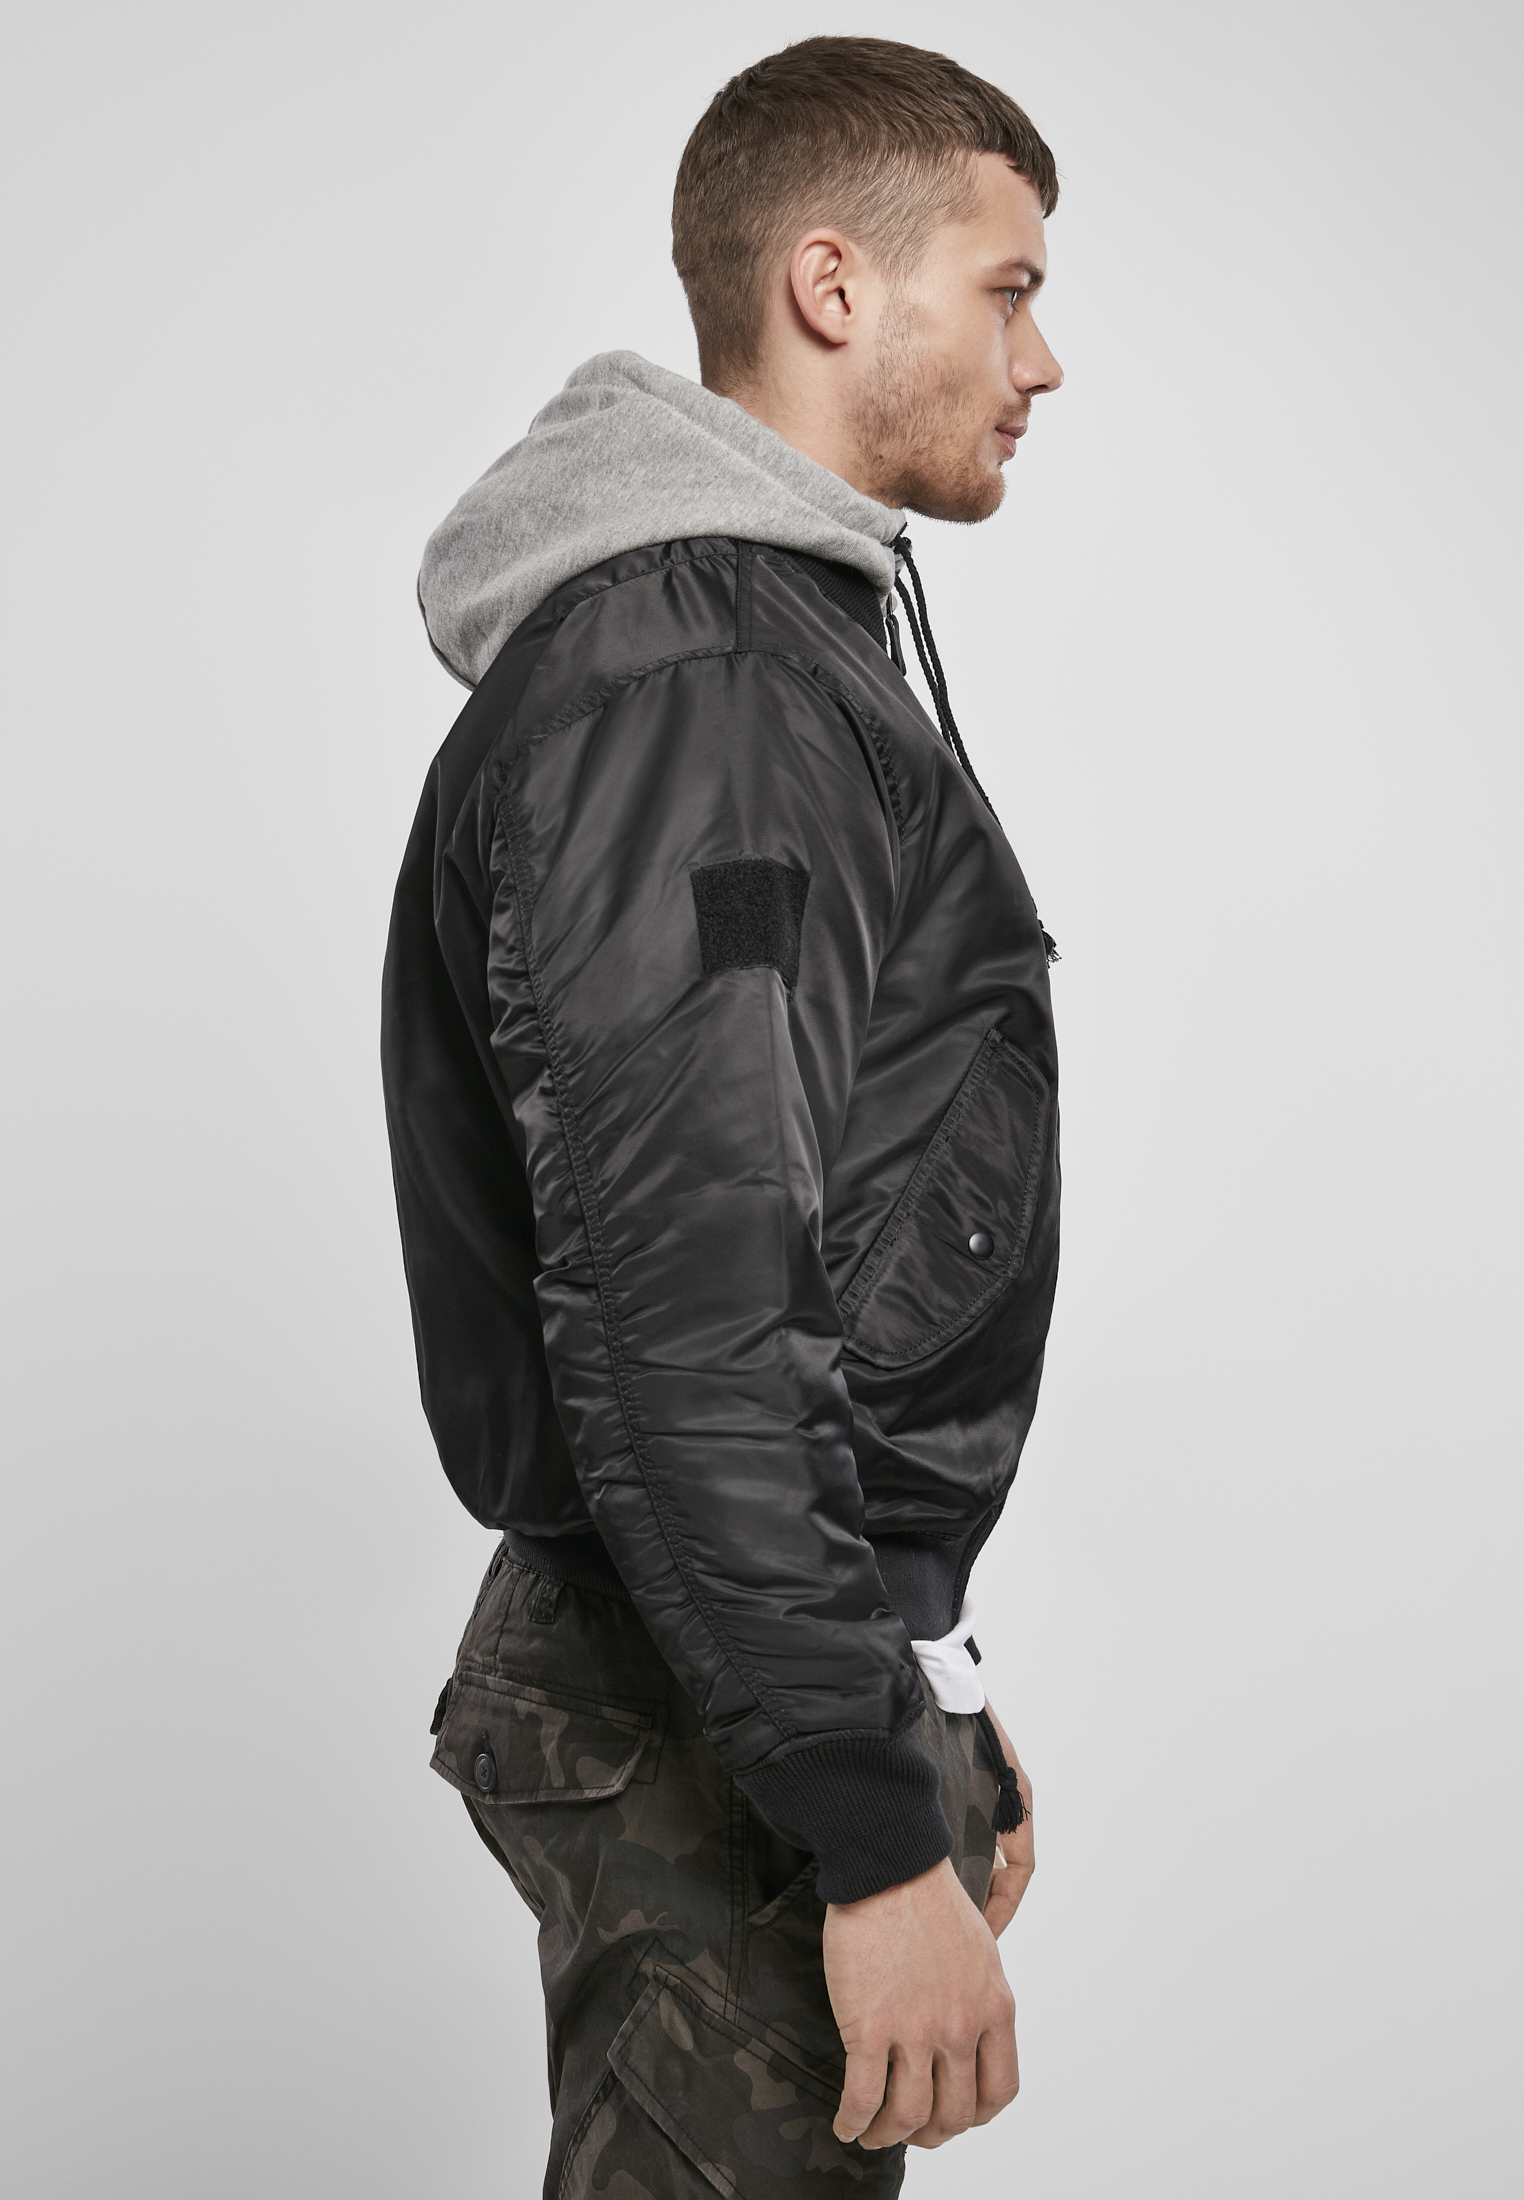 Jacken Hooded MA1 Bomber Jacket in Farbe blk/gry